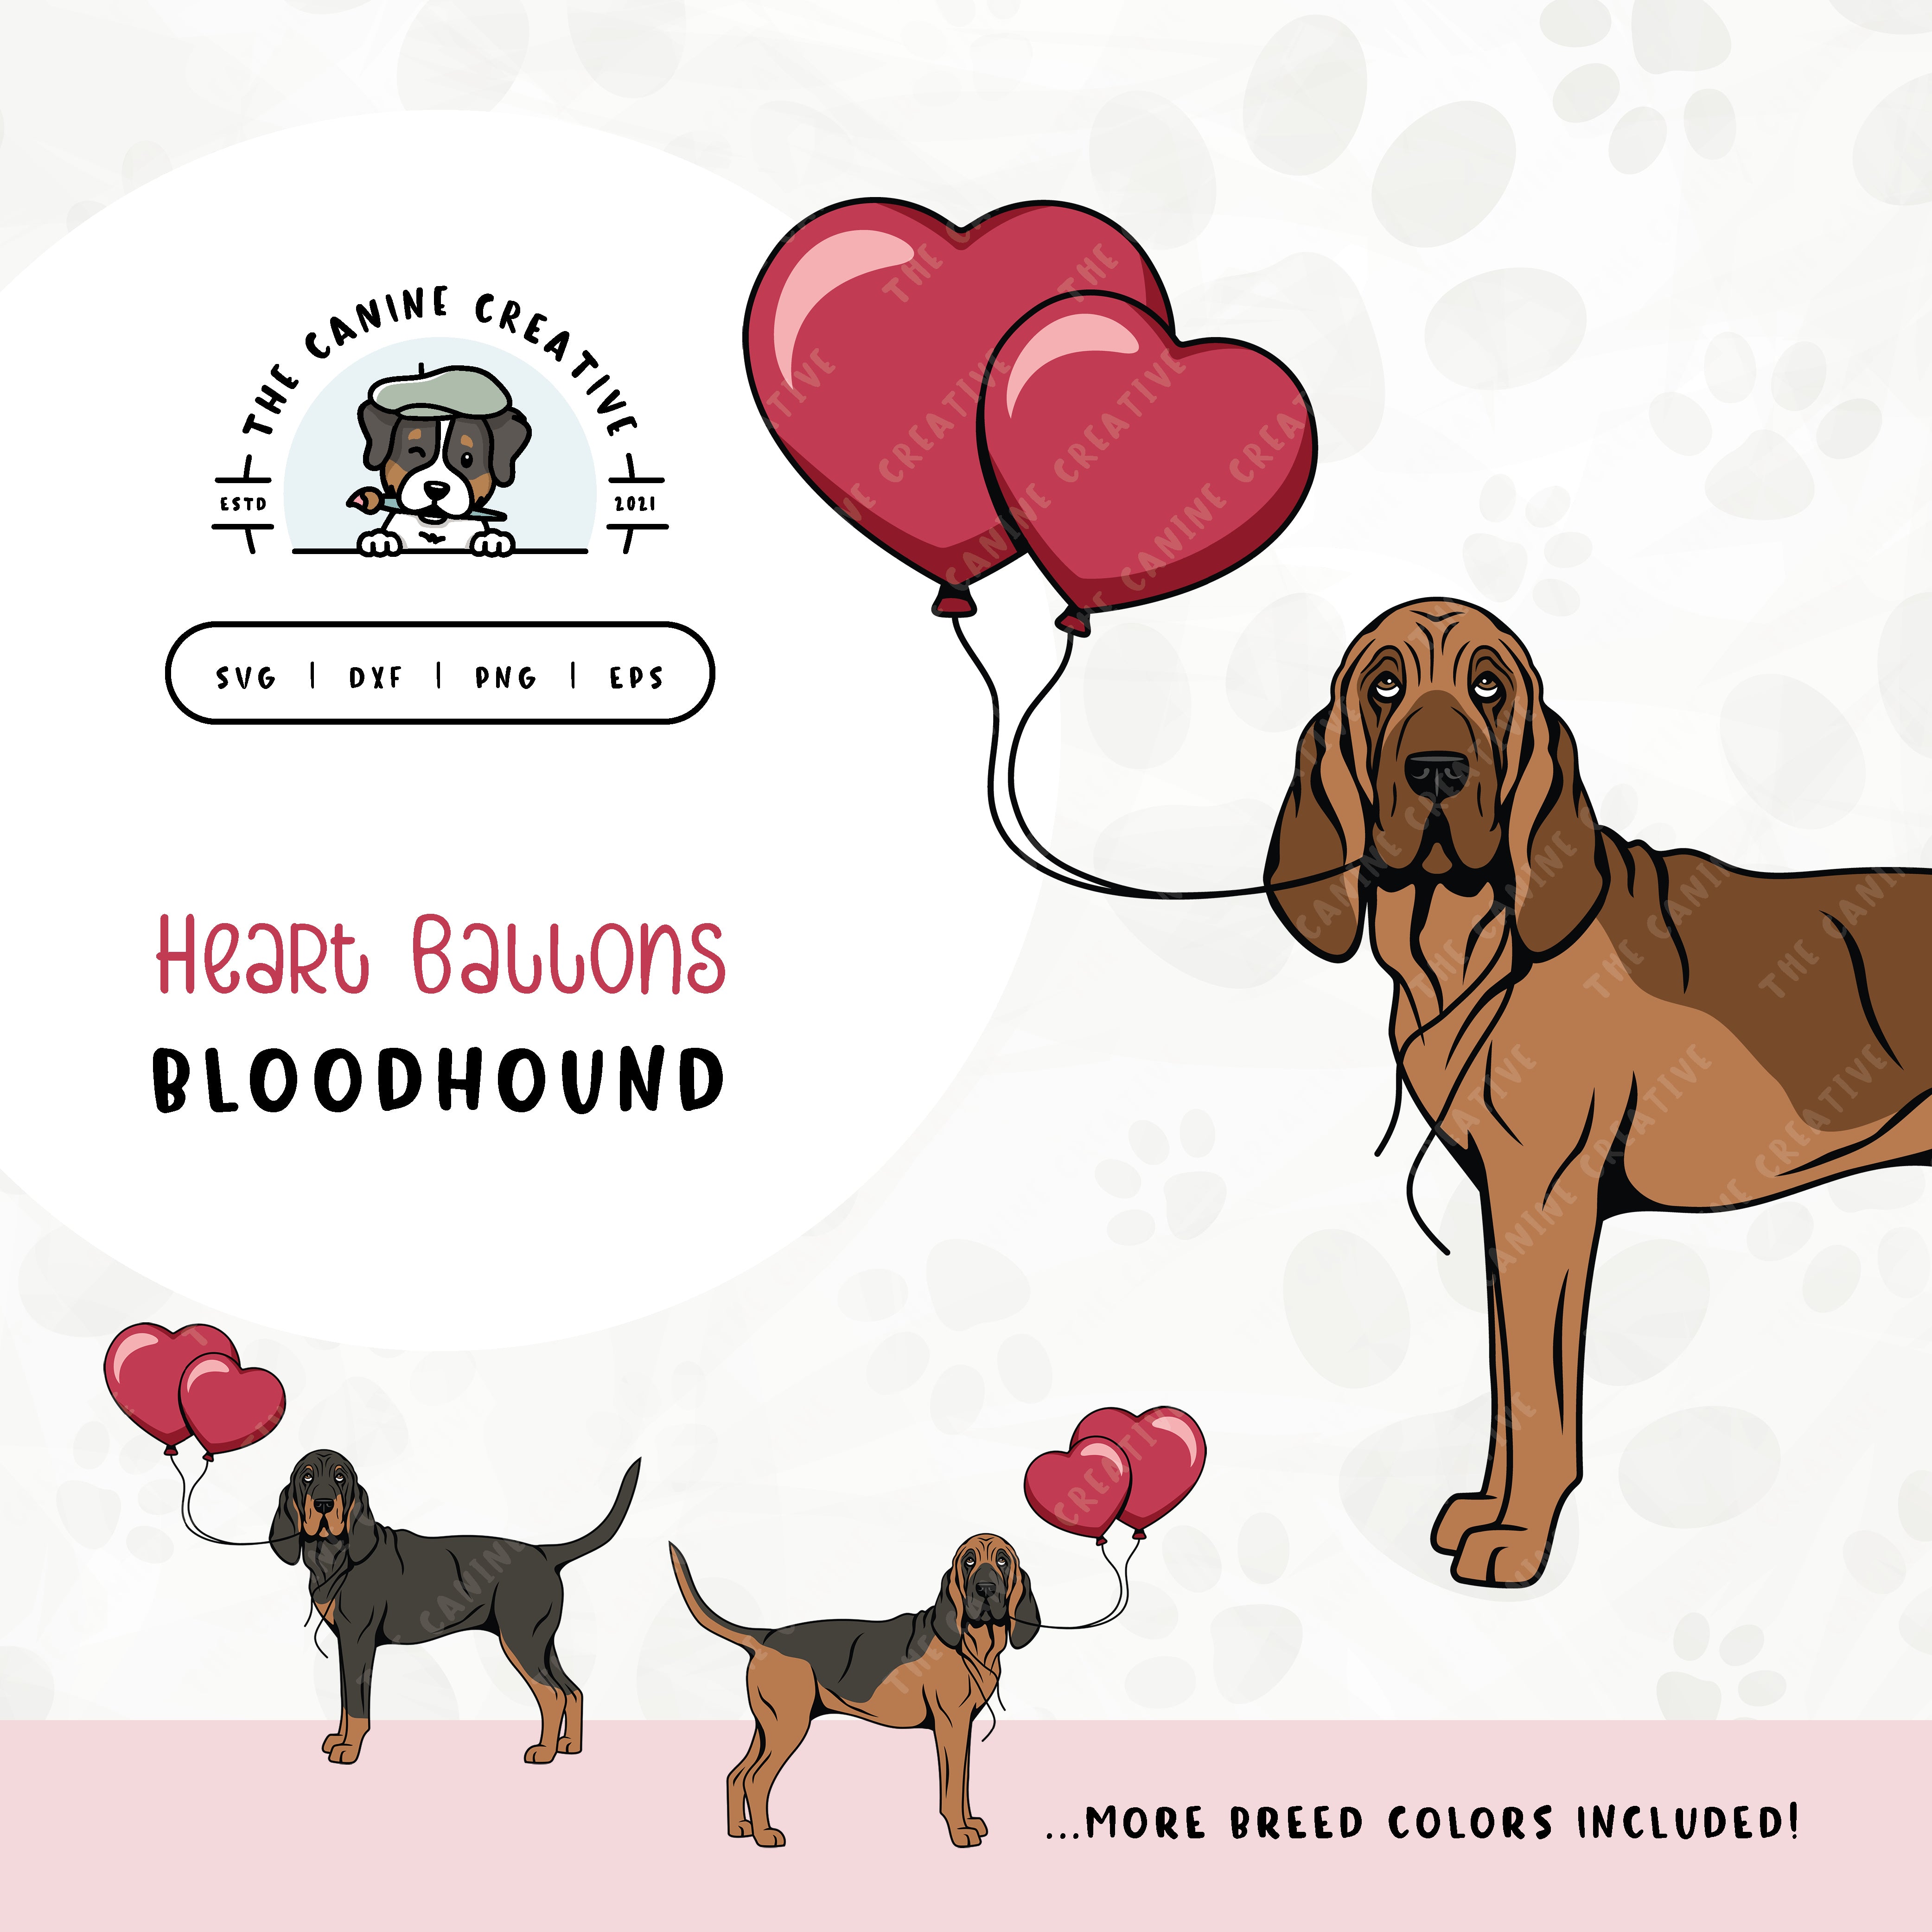 This charming illustration of a Bloodhound features a dog holding heart-shaped balloons. File formats include: SVG, DXF, PNG, and EPS.